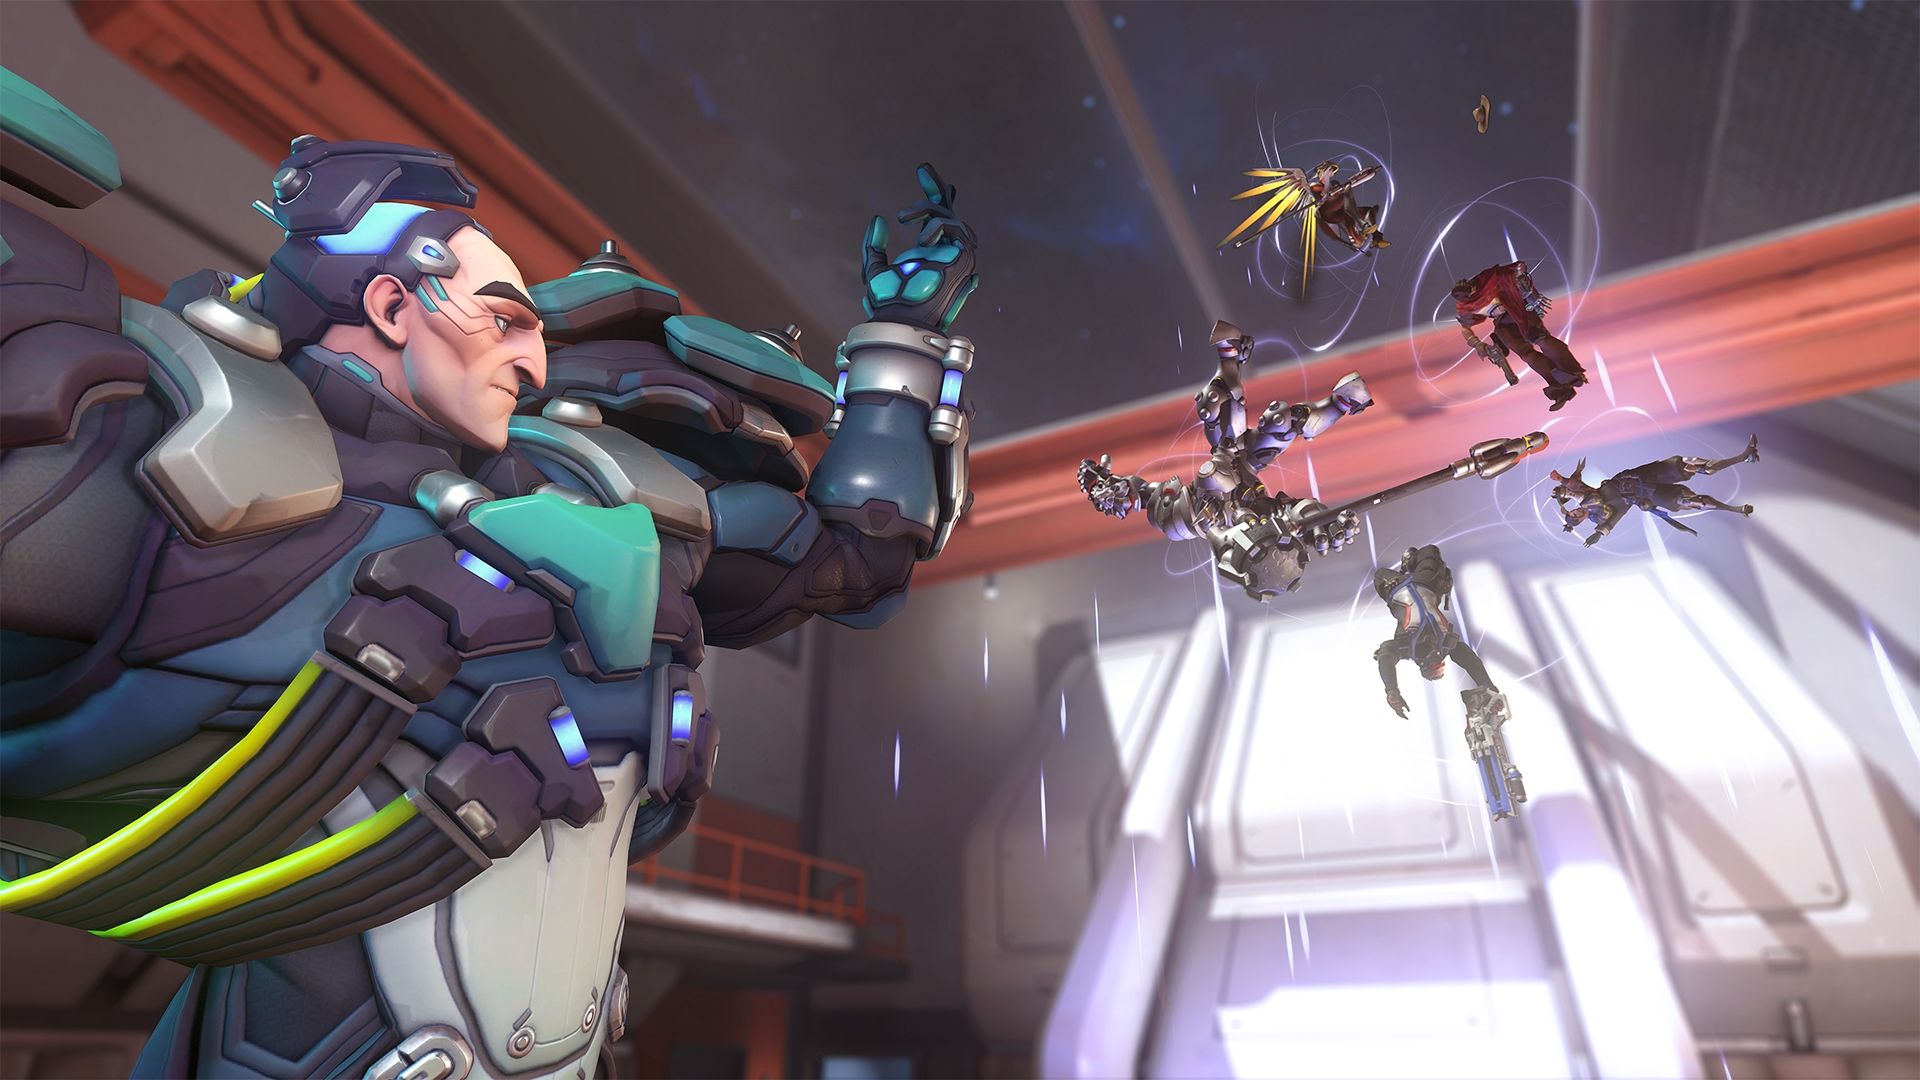 Overwatch Update Adds 4K/60 FPS And 1440p/120 FPS Support, 55% OFF